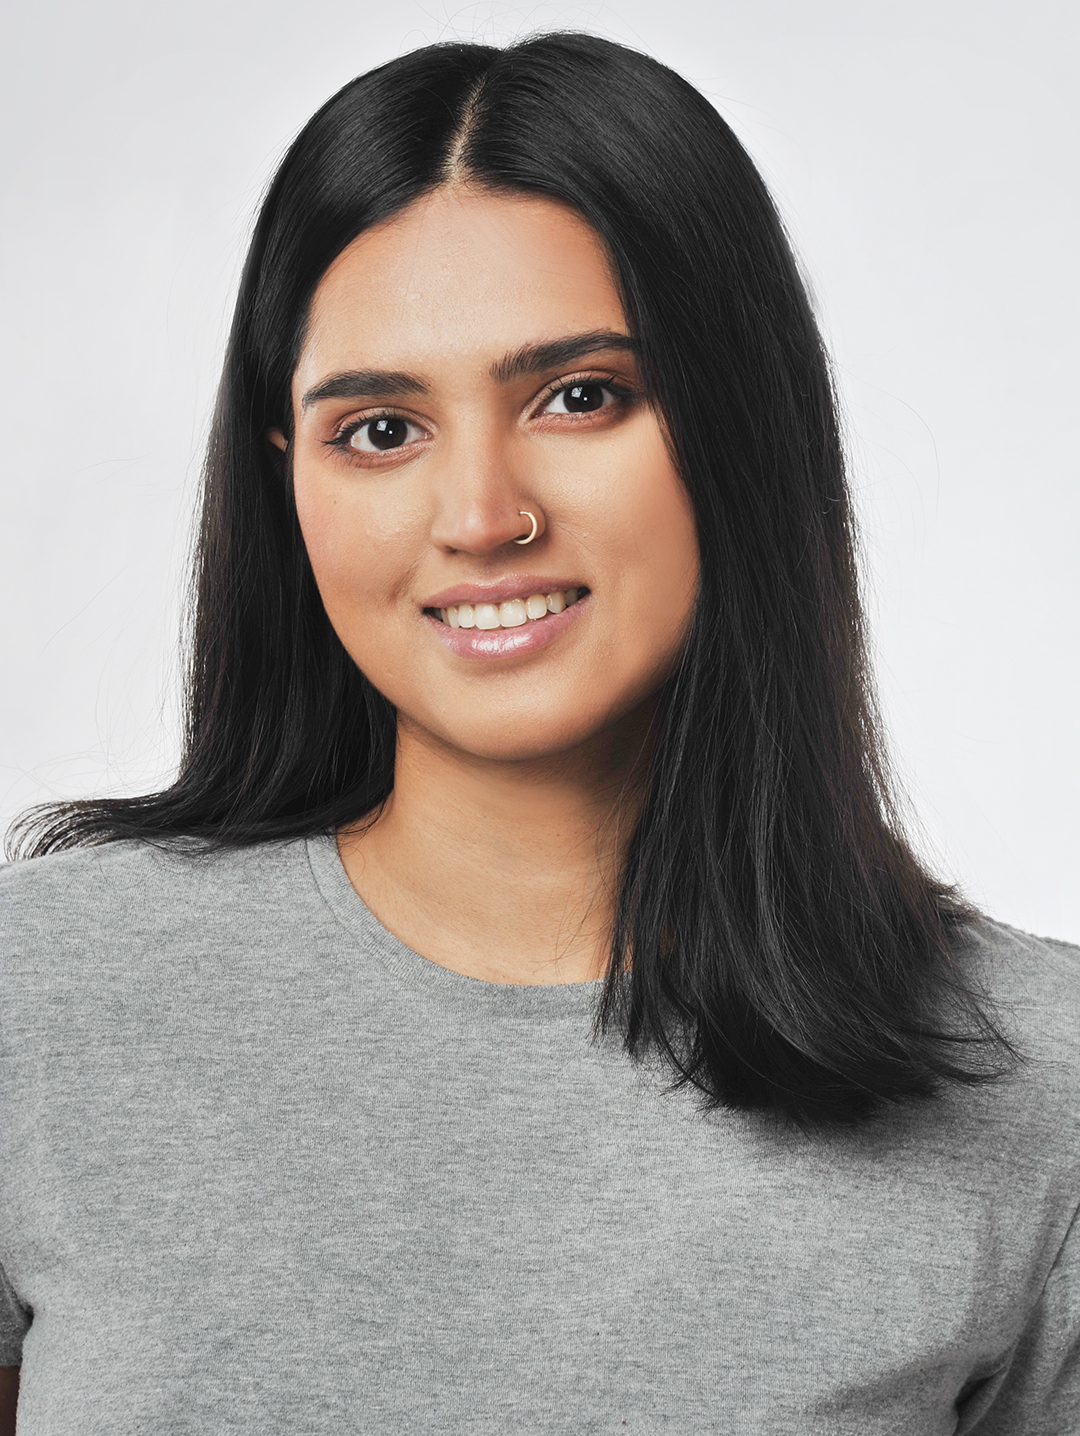 Headshot of Purawai Vyas wearing a heather grey top, in front of an off-white background. She is smiling directly at the camera.